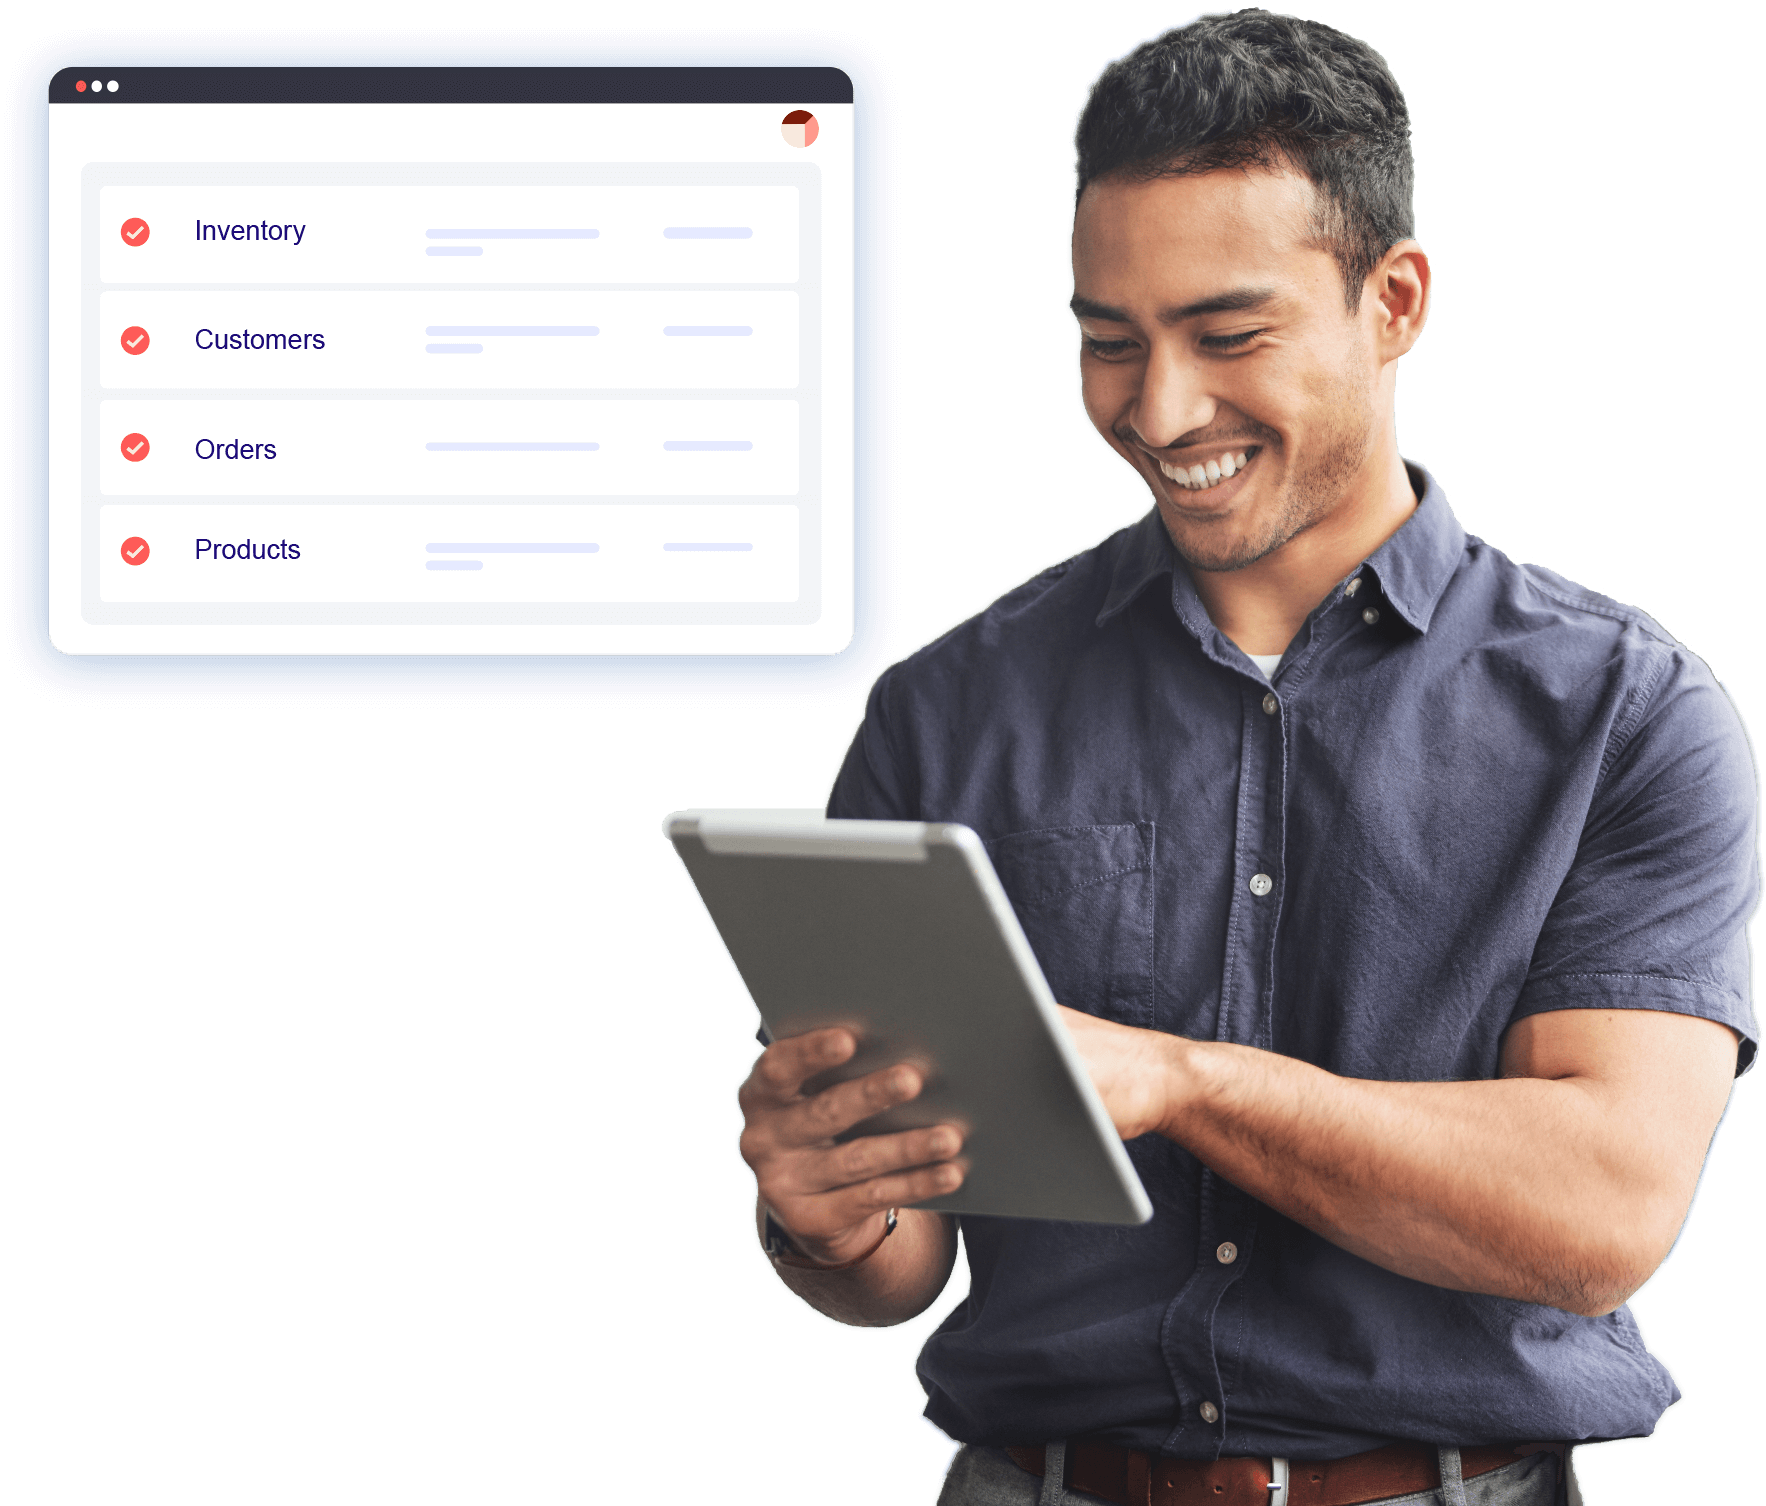 Man using tablet and smiling. There is a list popped out with Inventory, Customers, orders, and Products.